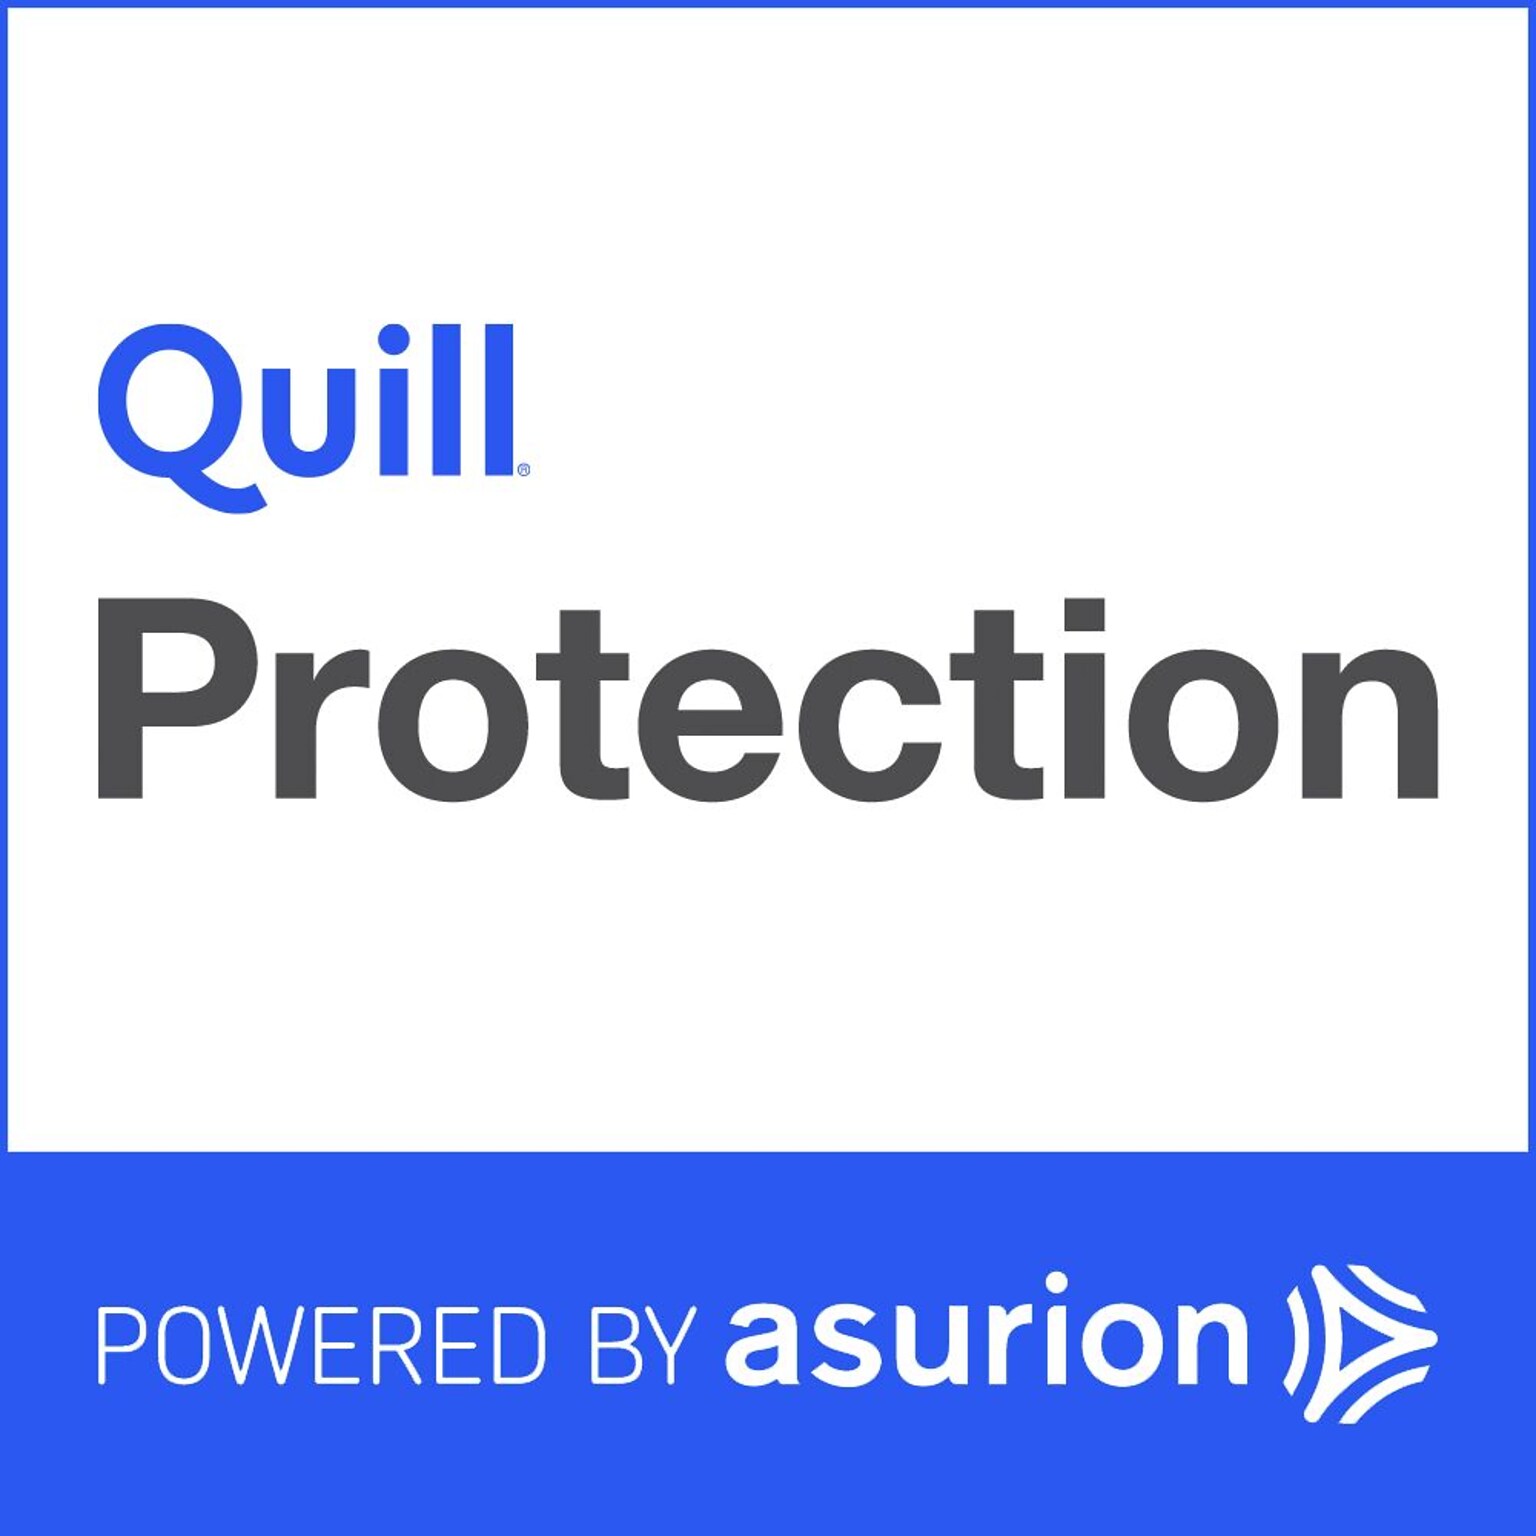 Quill.com 2 Year Protection Plan $100-$199.99